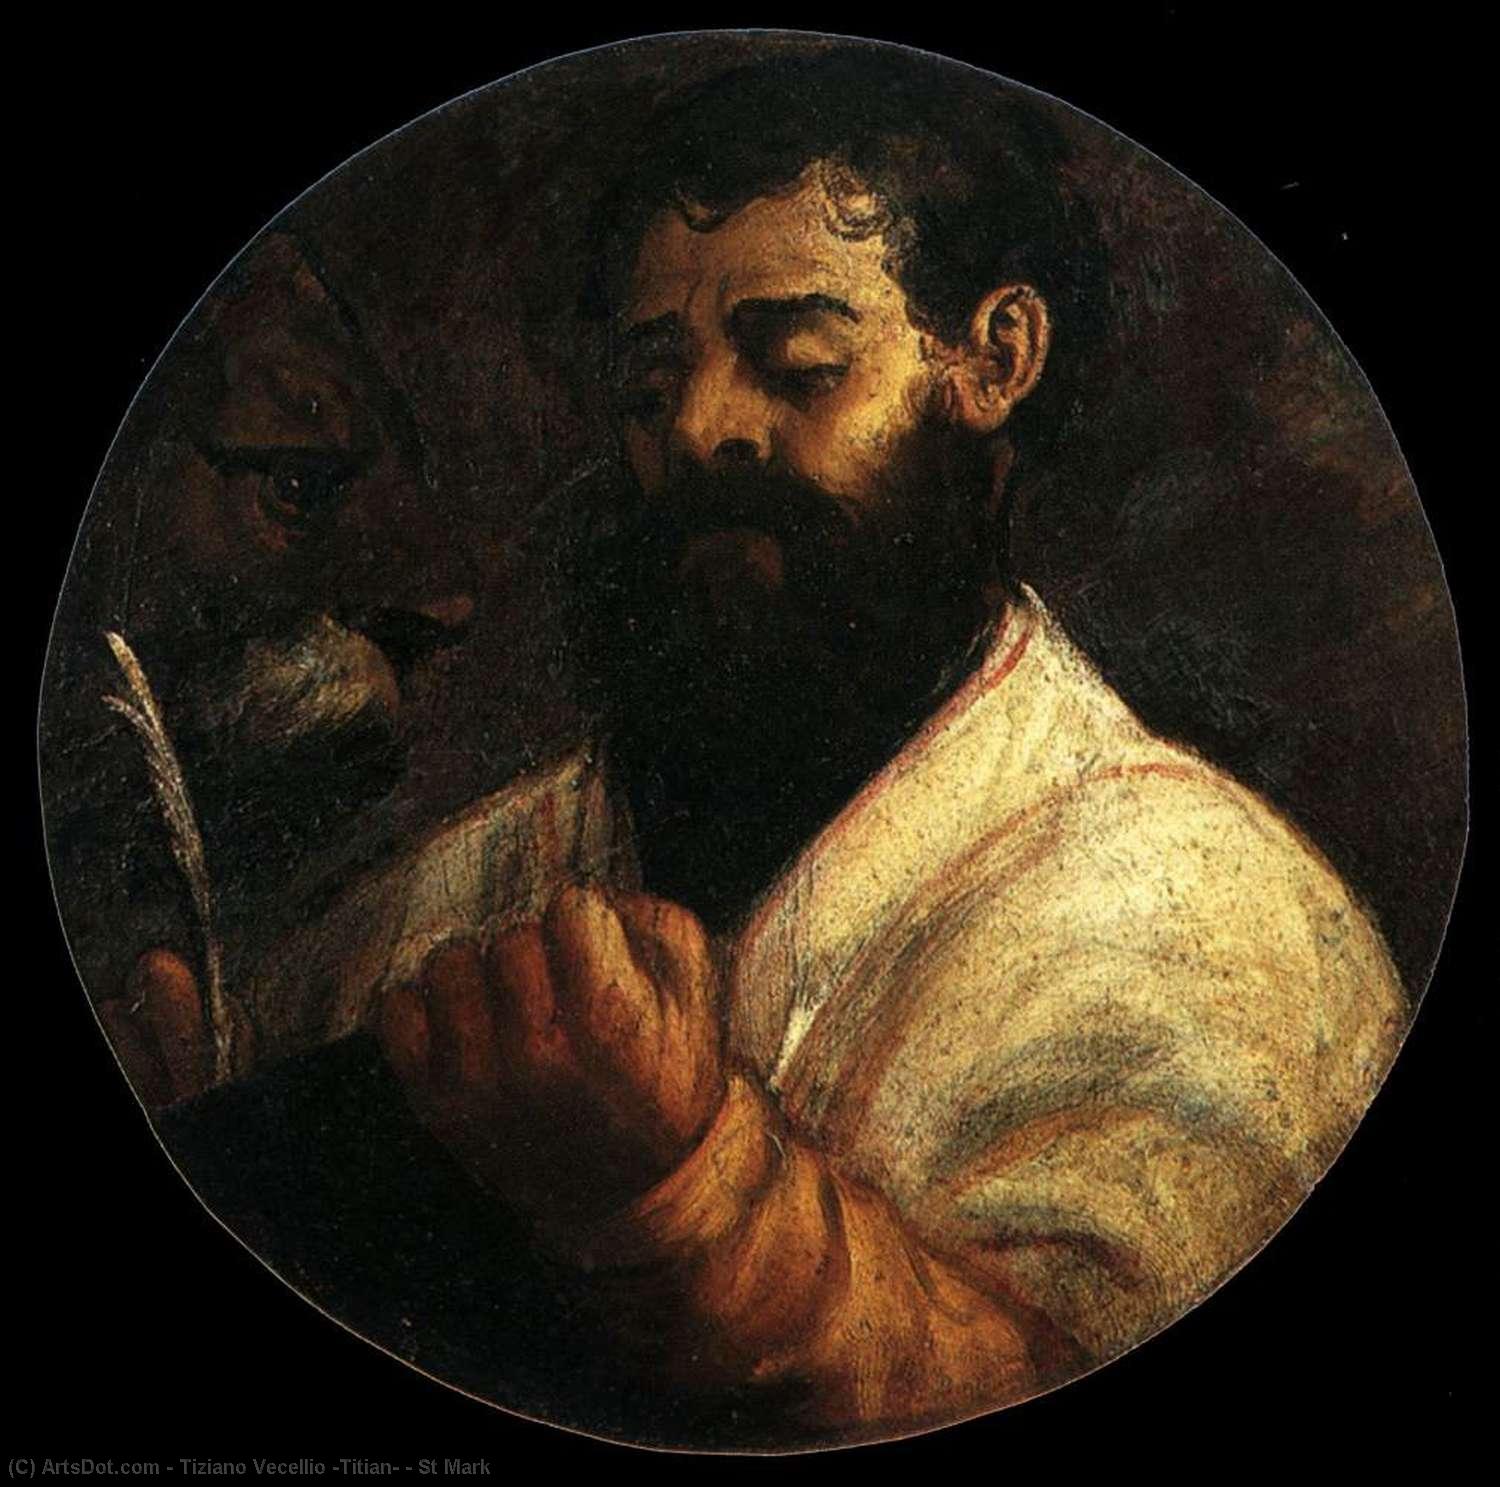 WikiOO.org - 百科事典 - 絵画、アートワーク Tiziano Vecellio (Titian) - セント マーク